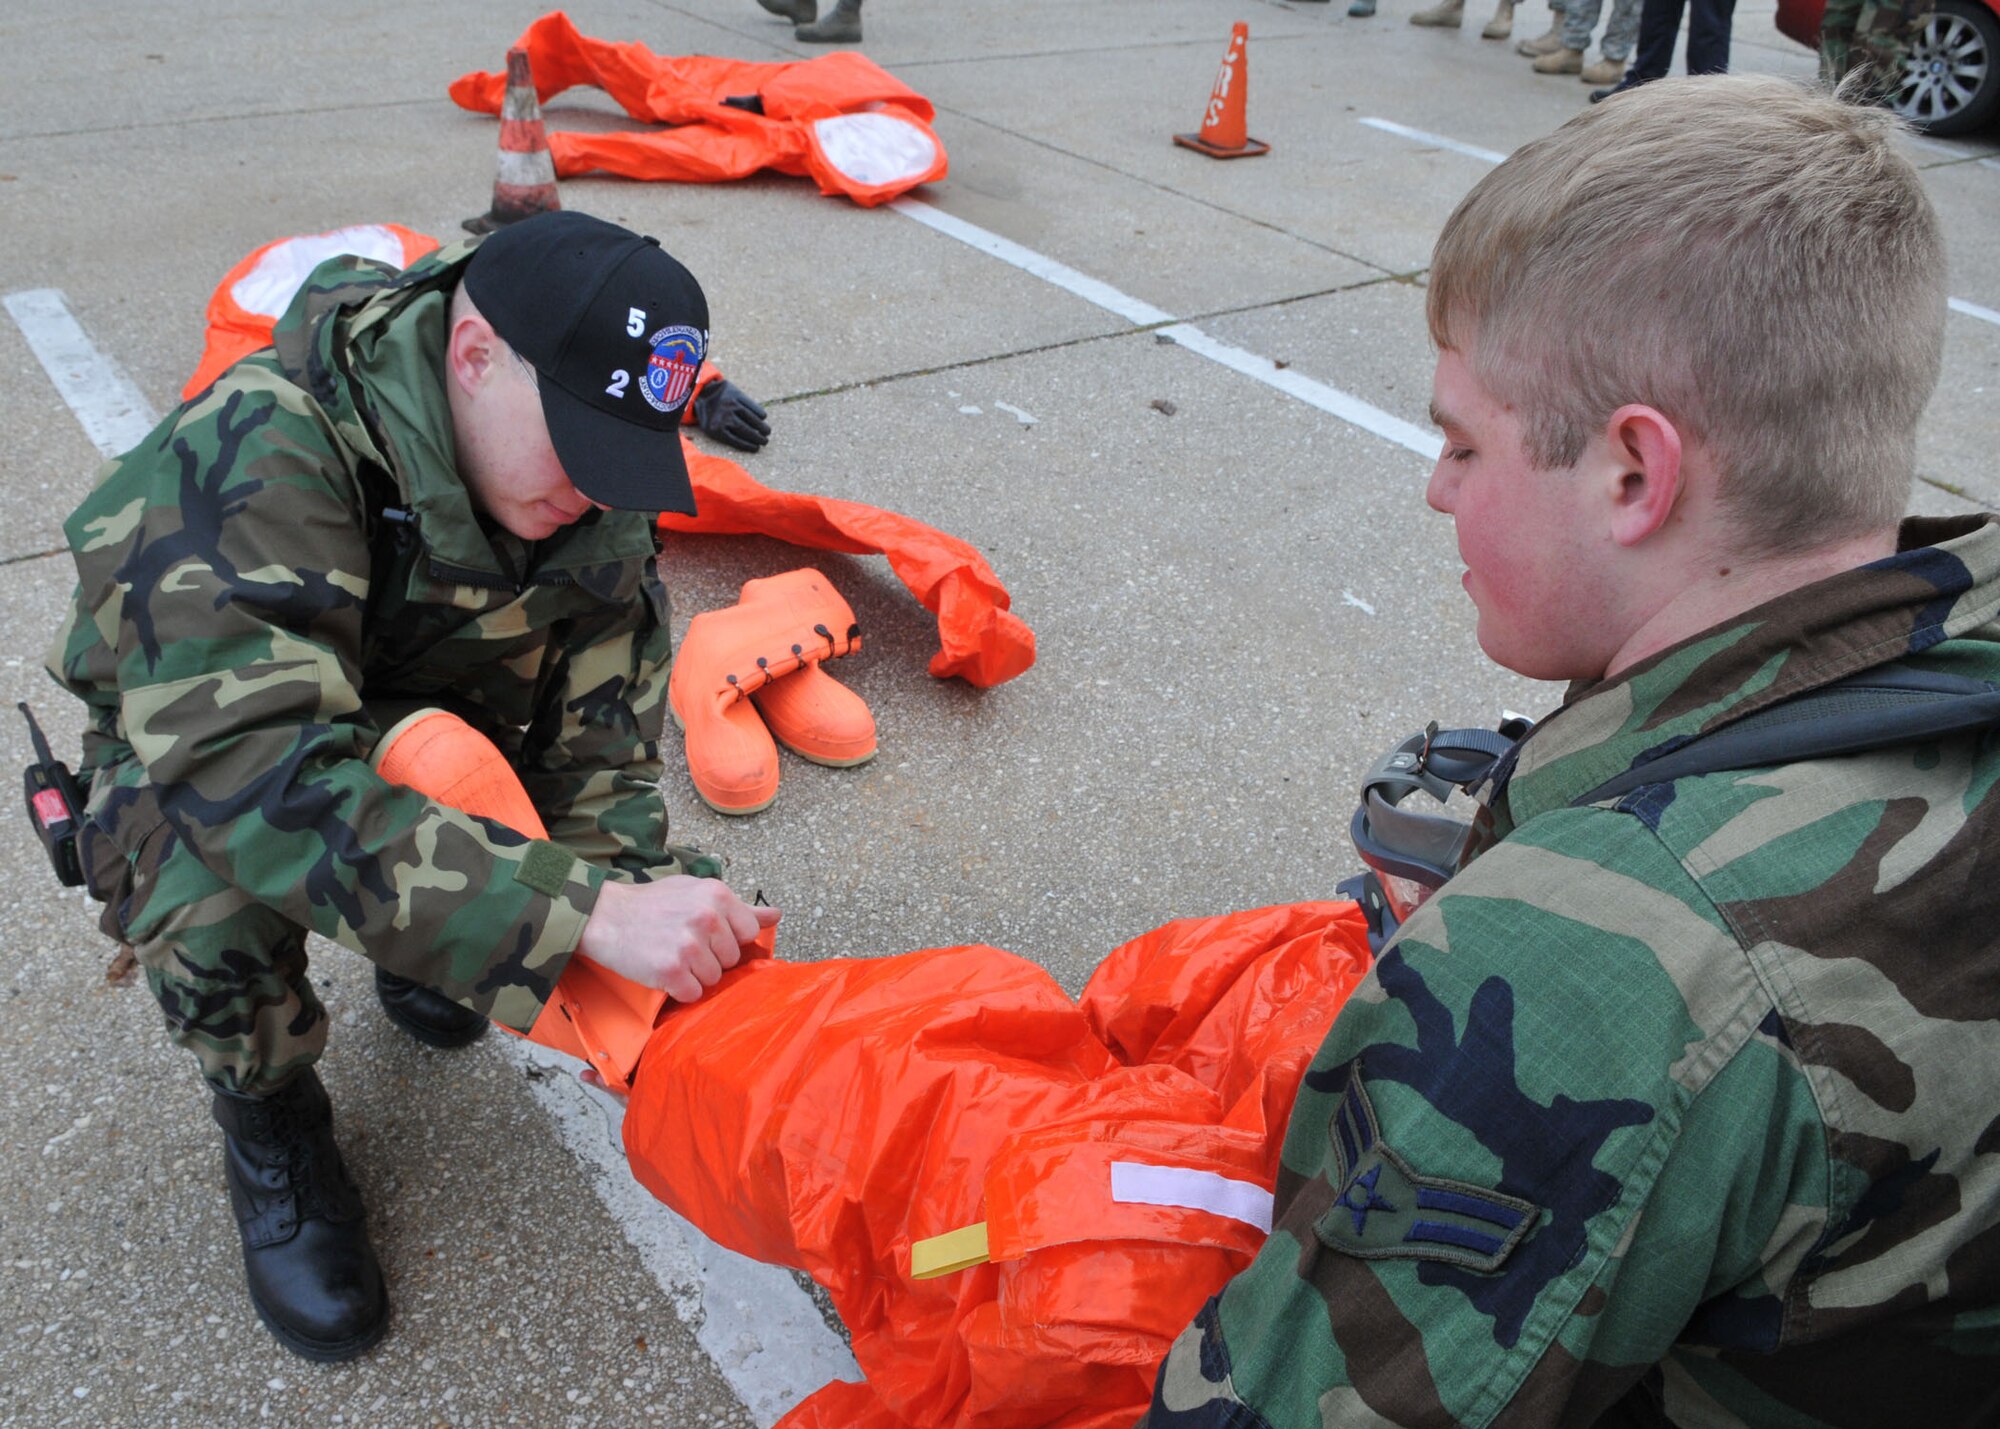 SPANGDAHLEM AIR BASE, Germany -- Staff Sgt. Roy Campos, 52nd Civil Engineer Squadron, assists Airman 1st Class Scott Carrol, 52nd CES, in demonstrating how to put on a class-A hazmat response suit during an on-scene commander's course Oct. 30. The course gave individuals training and certification to be a commander of an incident or work in an emergency operations center. (U.S. Air Force photo/Airman 1st Class Nick Wilson) 